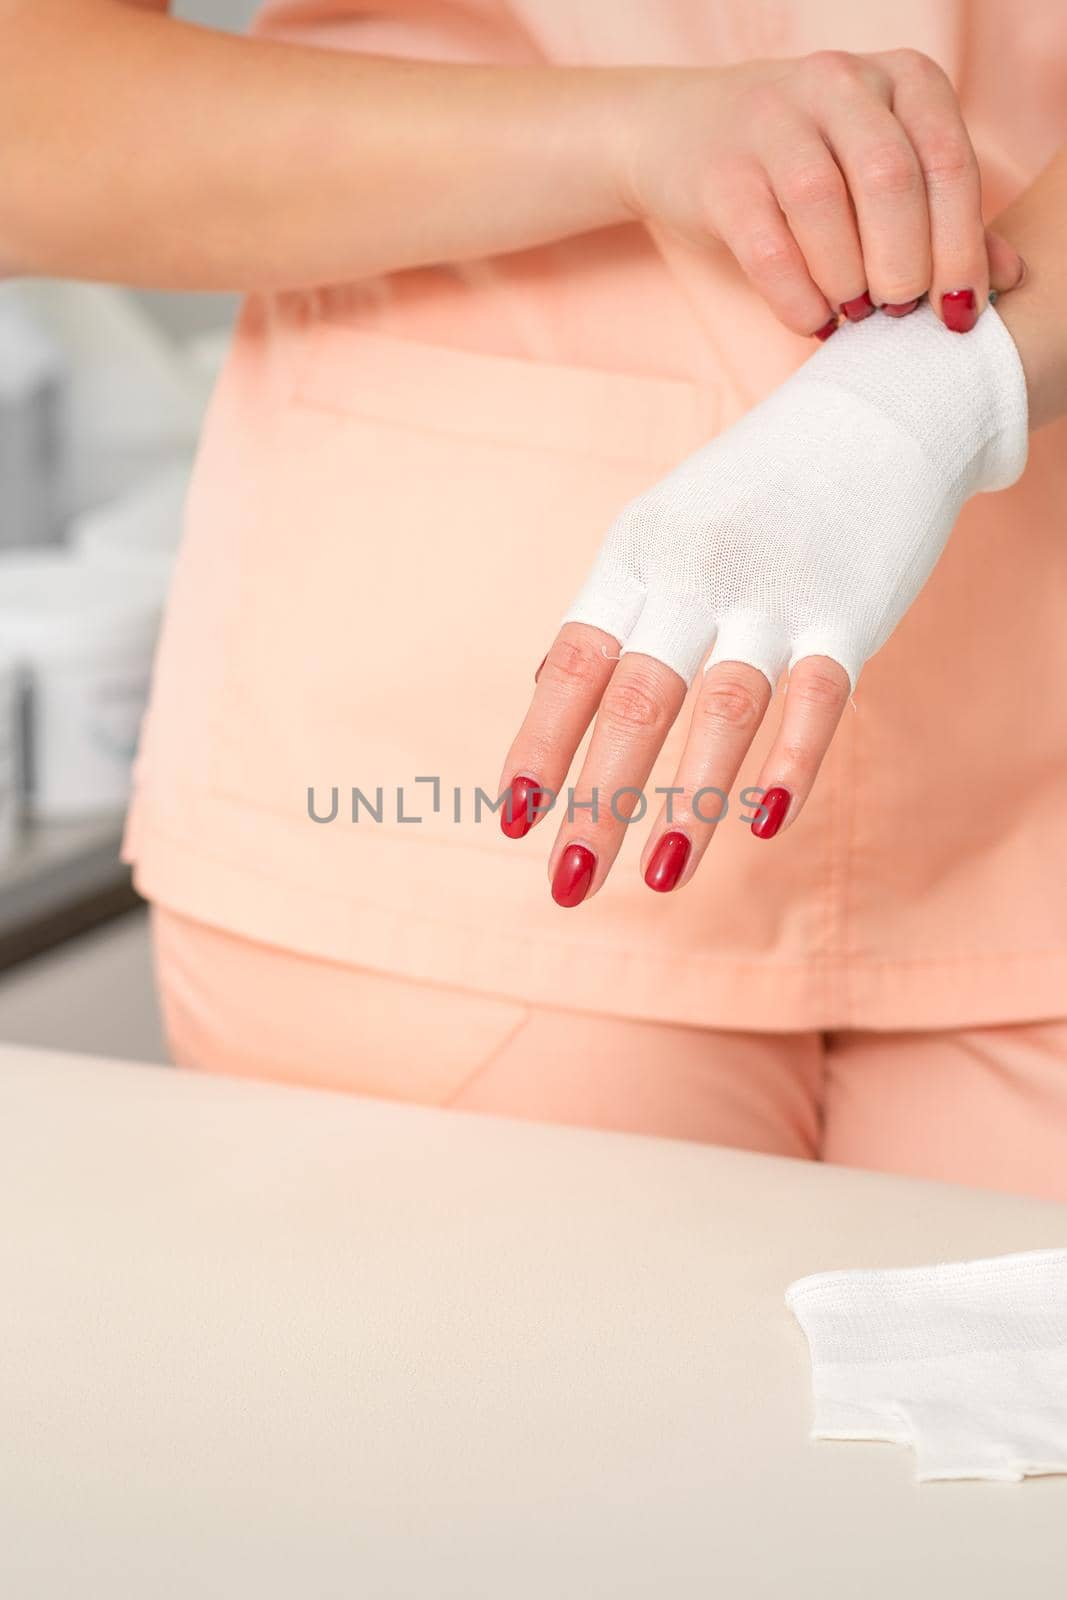 Cosmetologist in workwear wearing white bamboo fingerless gloves on her hands